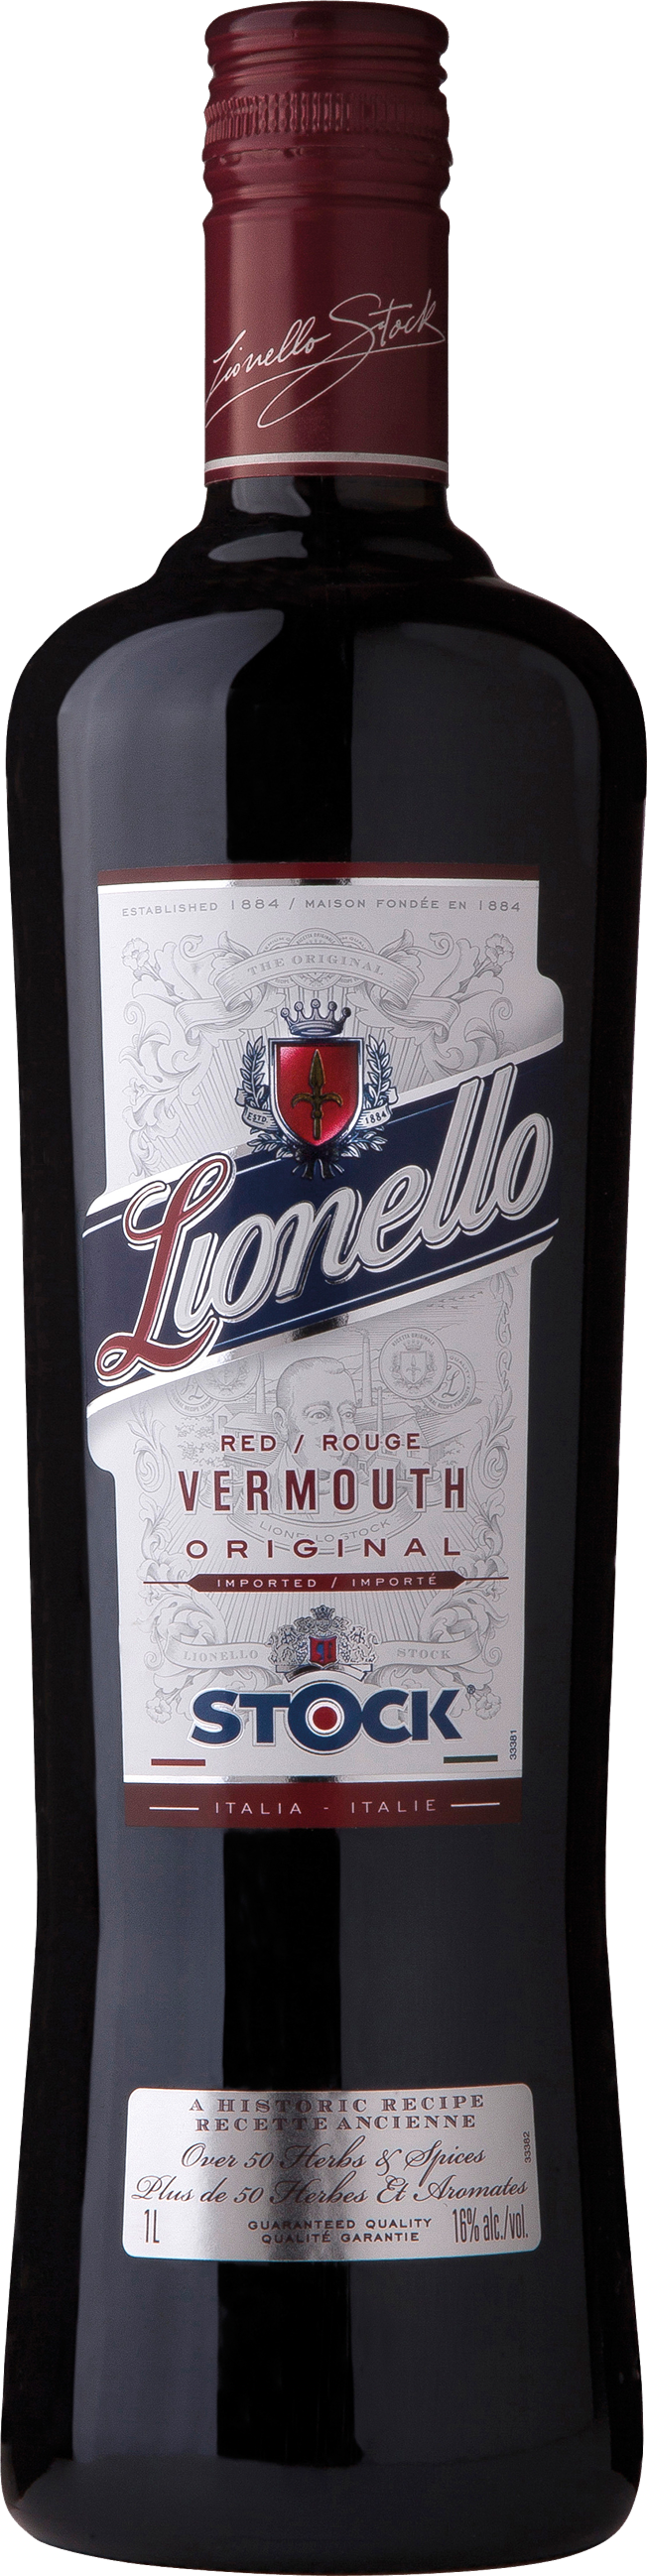 STOCK ITALIAN SWEET RED VERMOUTH 1L